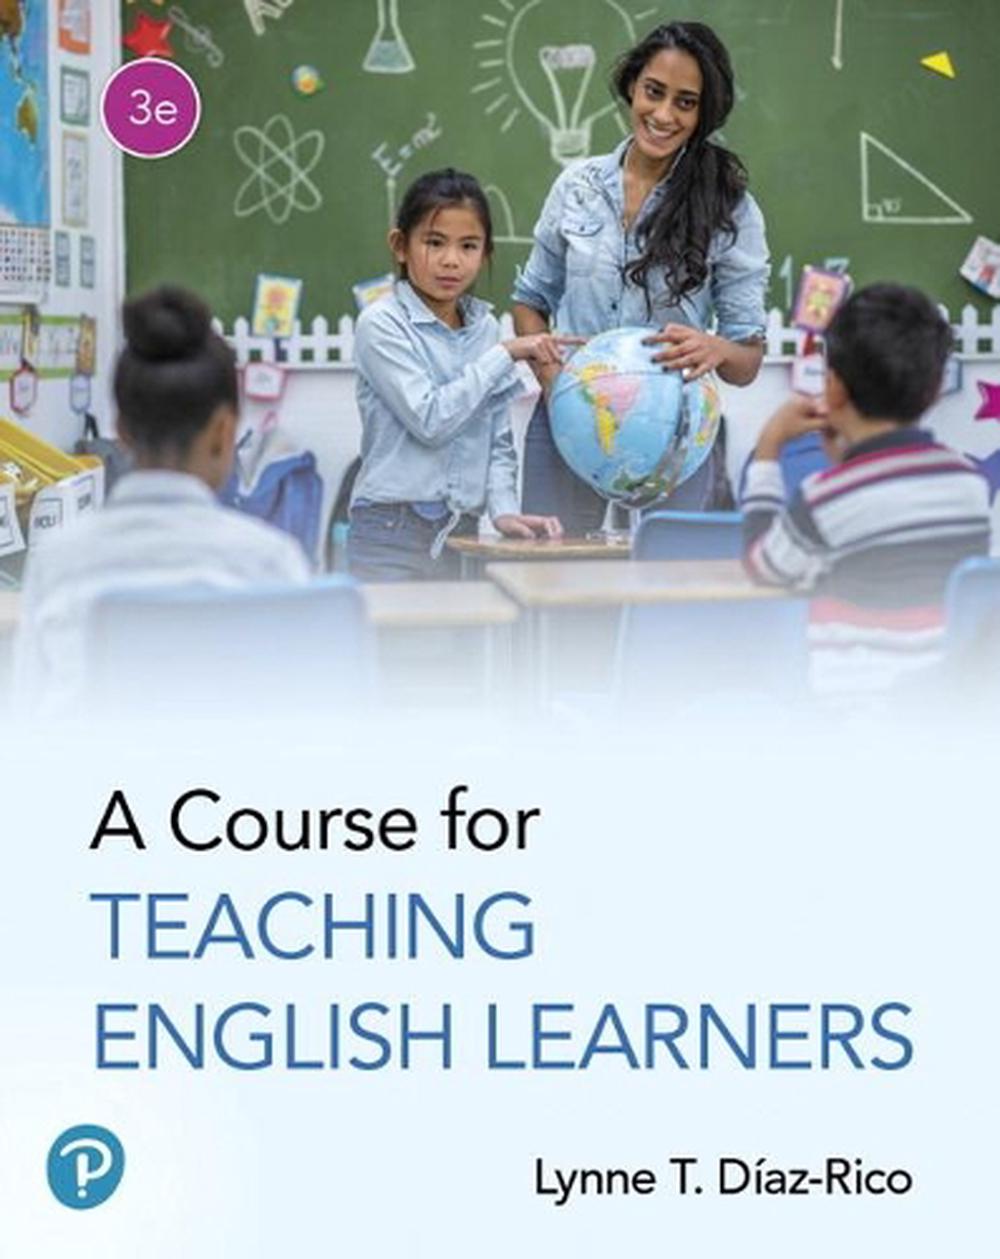 Course for Teaching English Learners by Lynne Diazrico (English